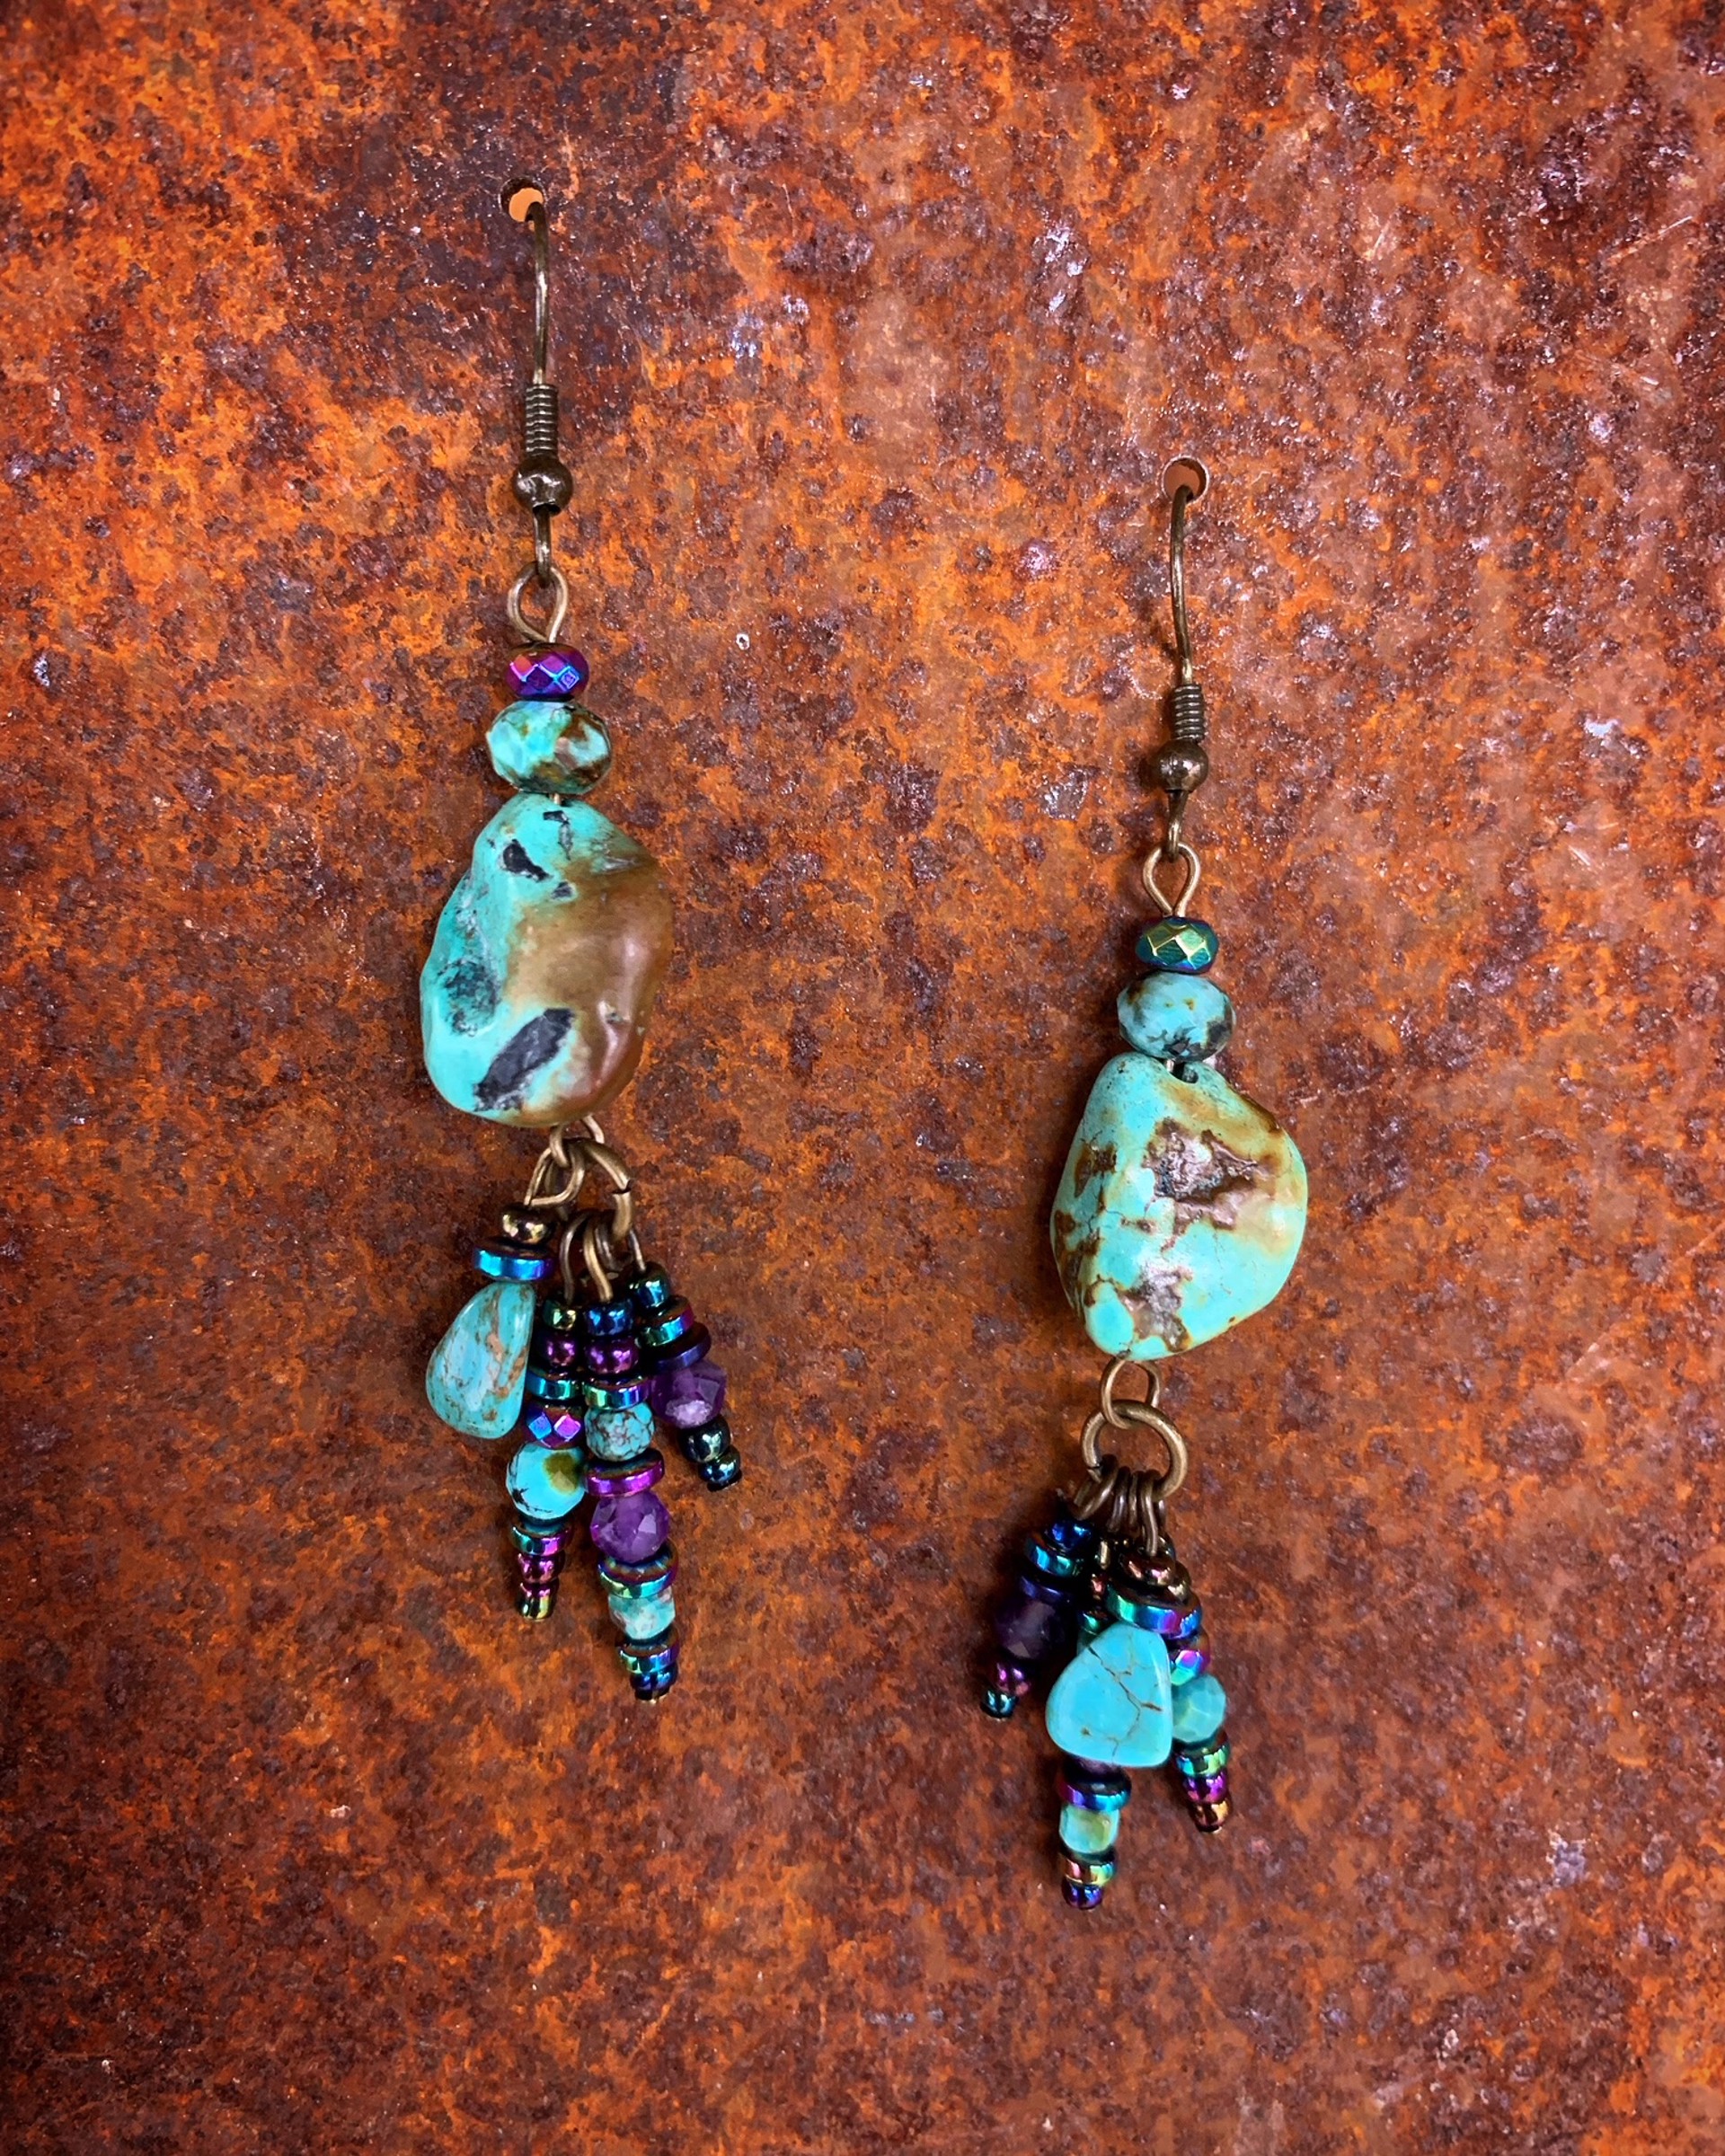 K770 Turquoise and Amethyst Earrings by Kelly Ormsby